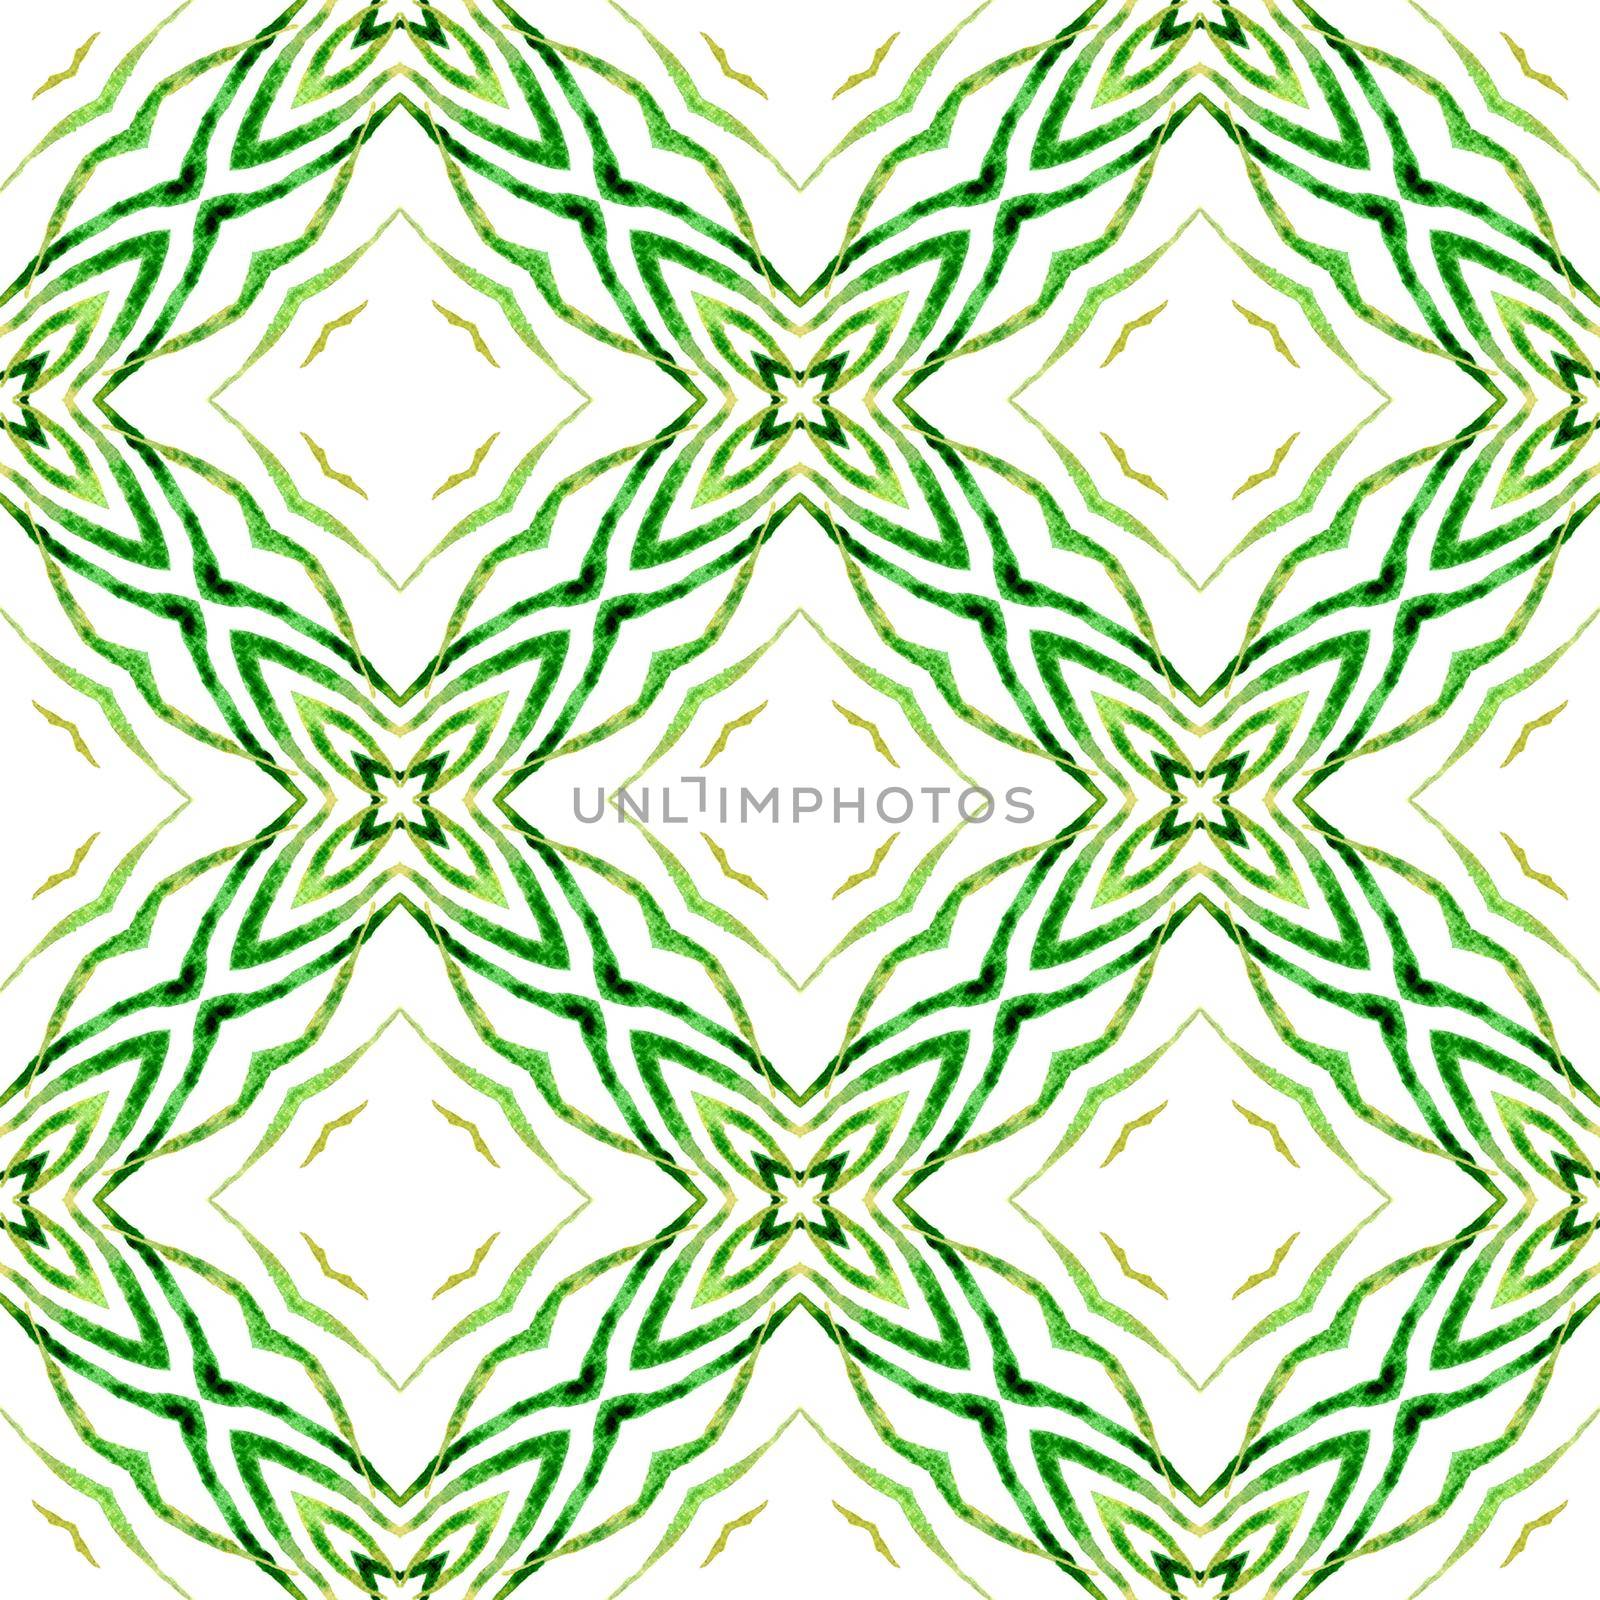 Textile ready exceptional print, swimwear fabric, wallpaper, wrapping. Green captivating boho chic summer design. Arabesque hand drawn design. Oriental arabesque hand drawn border.